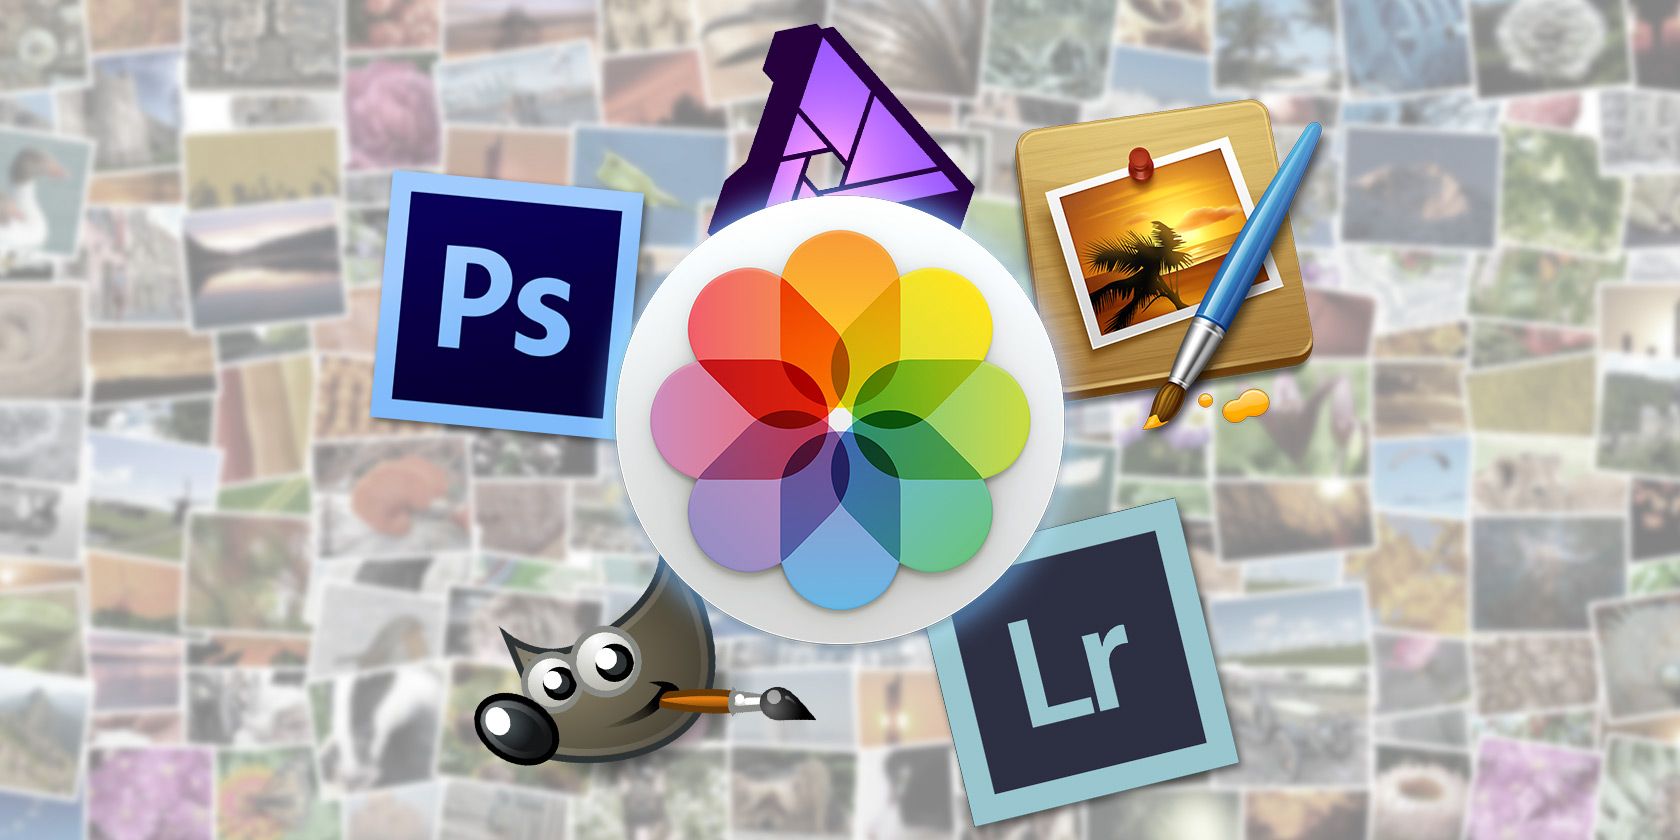 free photoshop download for mac os x 10.10.5